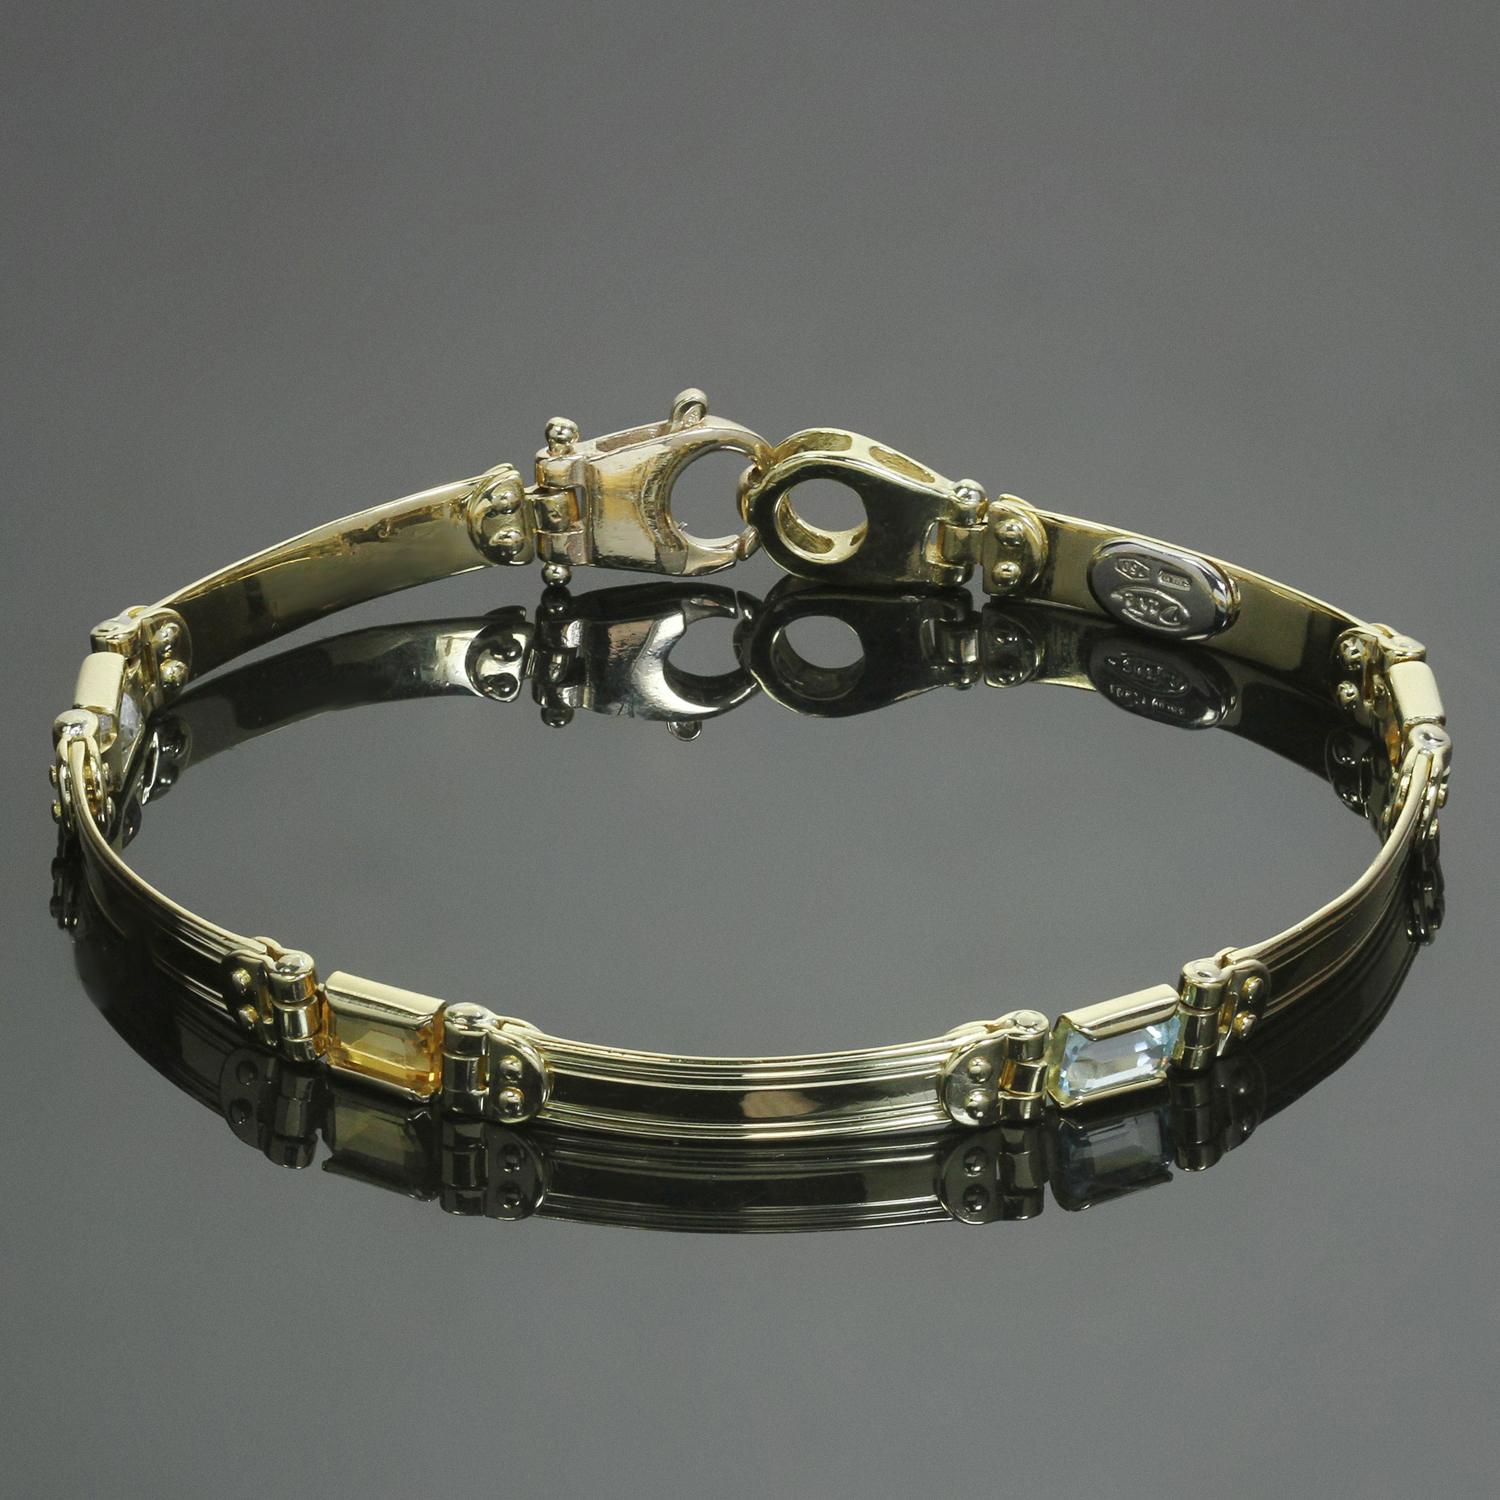 This classic estate bracelet is crafted in 18k yellow gold and features a chic link design accented with links of rectangular-cut blue and yellow topaz gemstones. Made in Italy circa 1980s. Measurements: 0.19